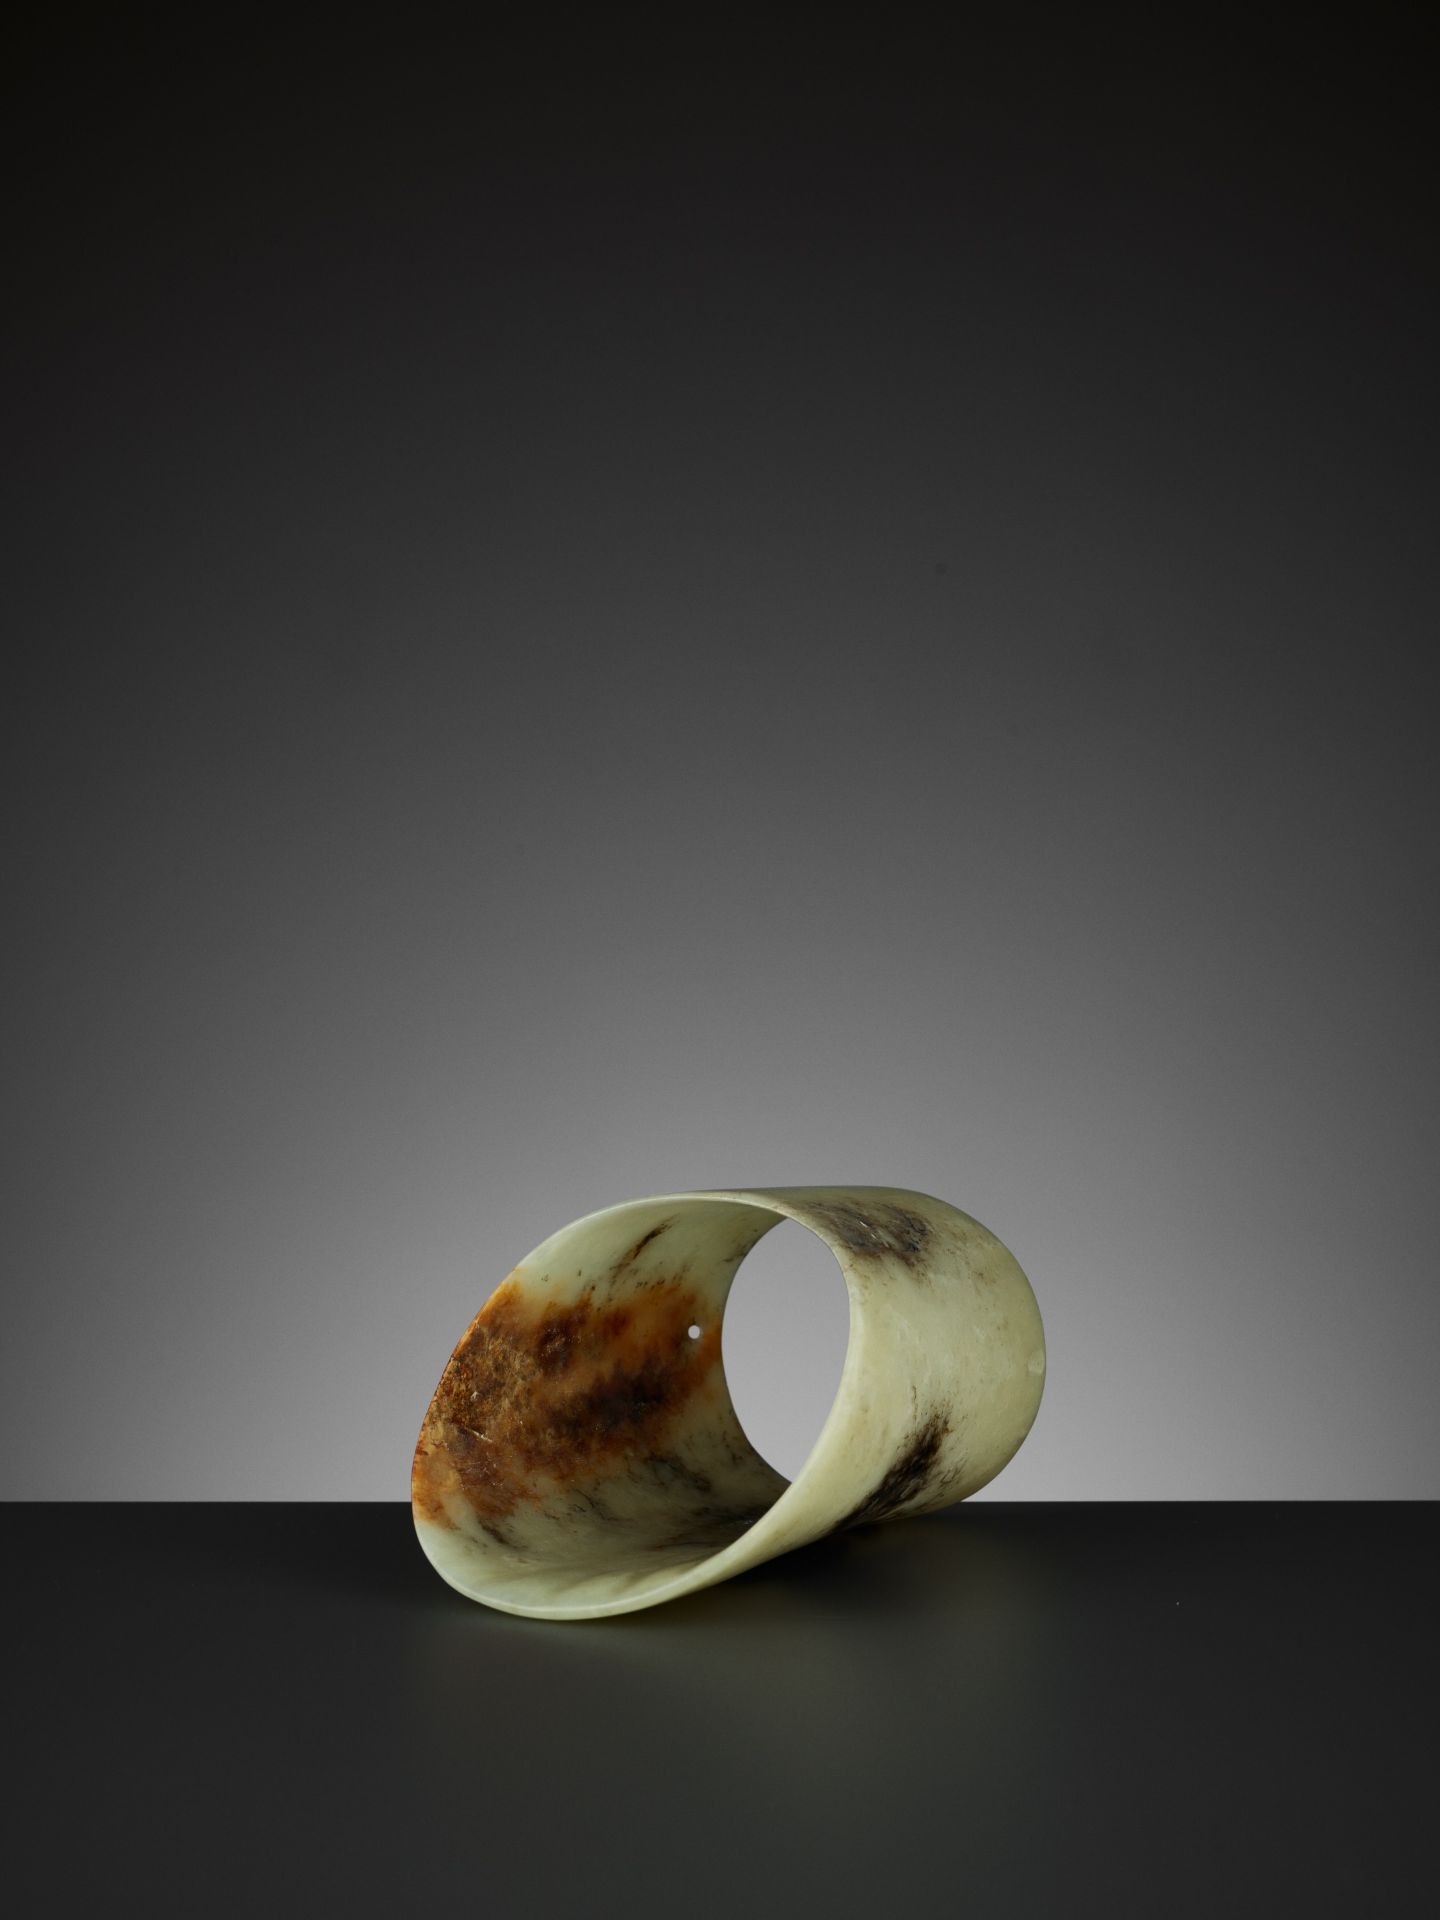 A PALE YELLOW AND RUSSET JADE HOOF-SHAPED ORNAMENT, HONGSHAN - Image 10 of 13